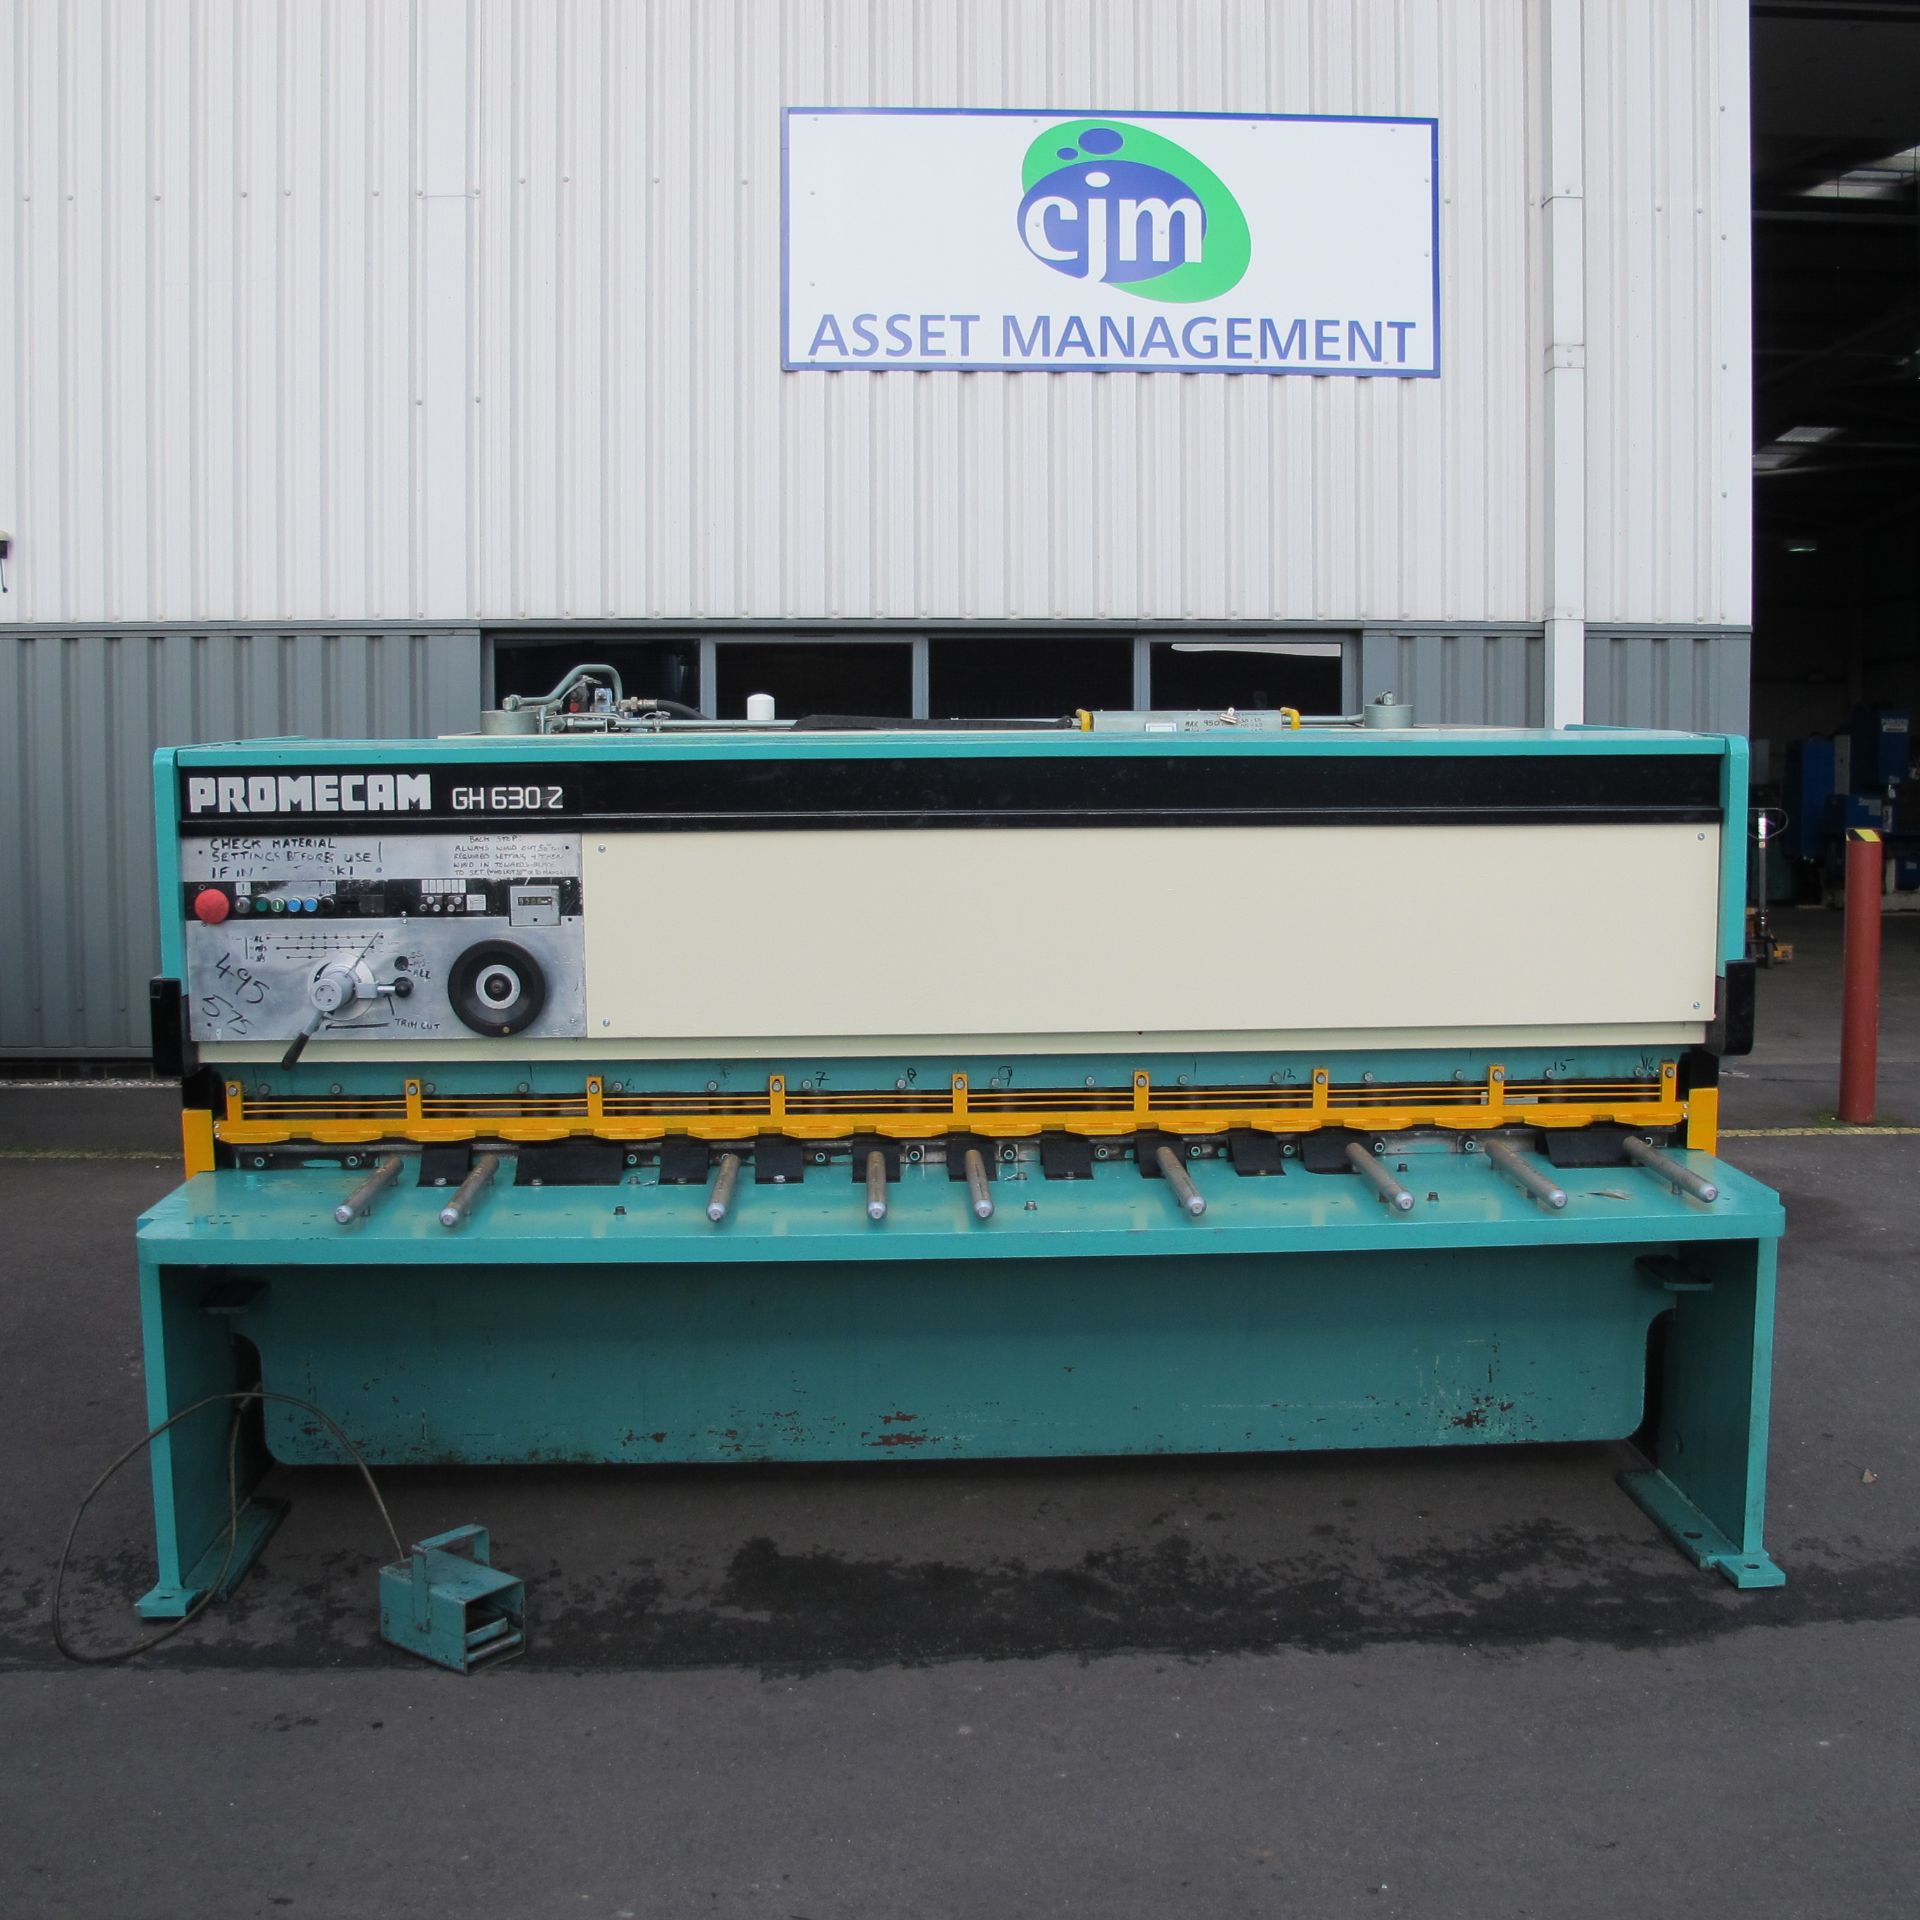 * Promecam Model GH630Z 3000 x 6mm Guillotine with power backgauge. This lot is sold on a 'Buyer